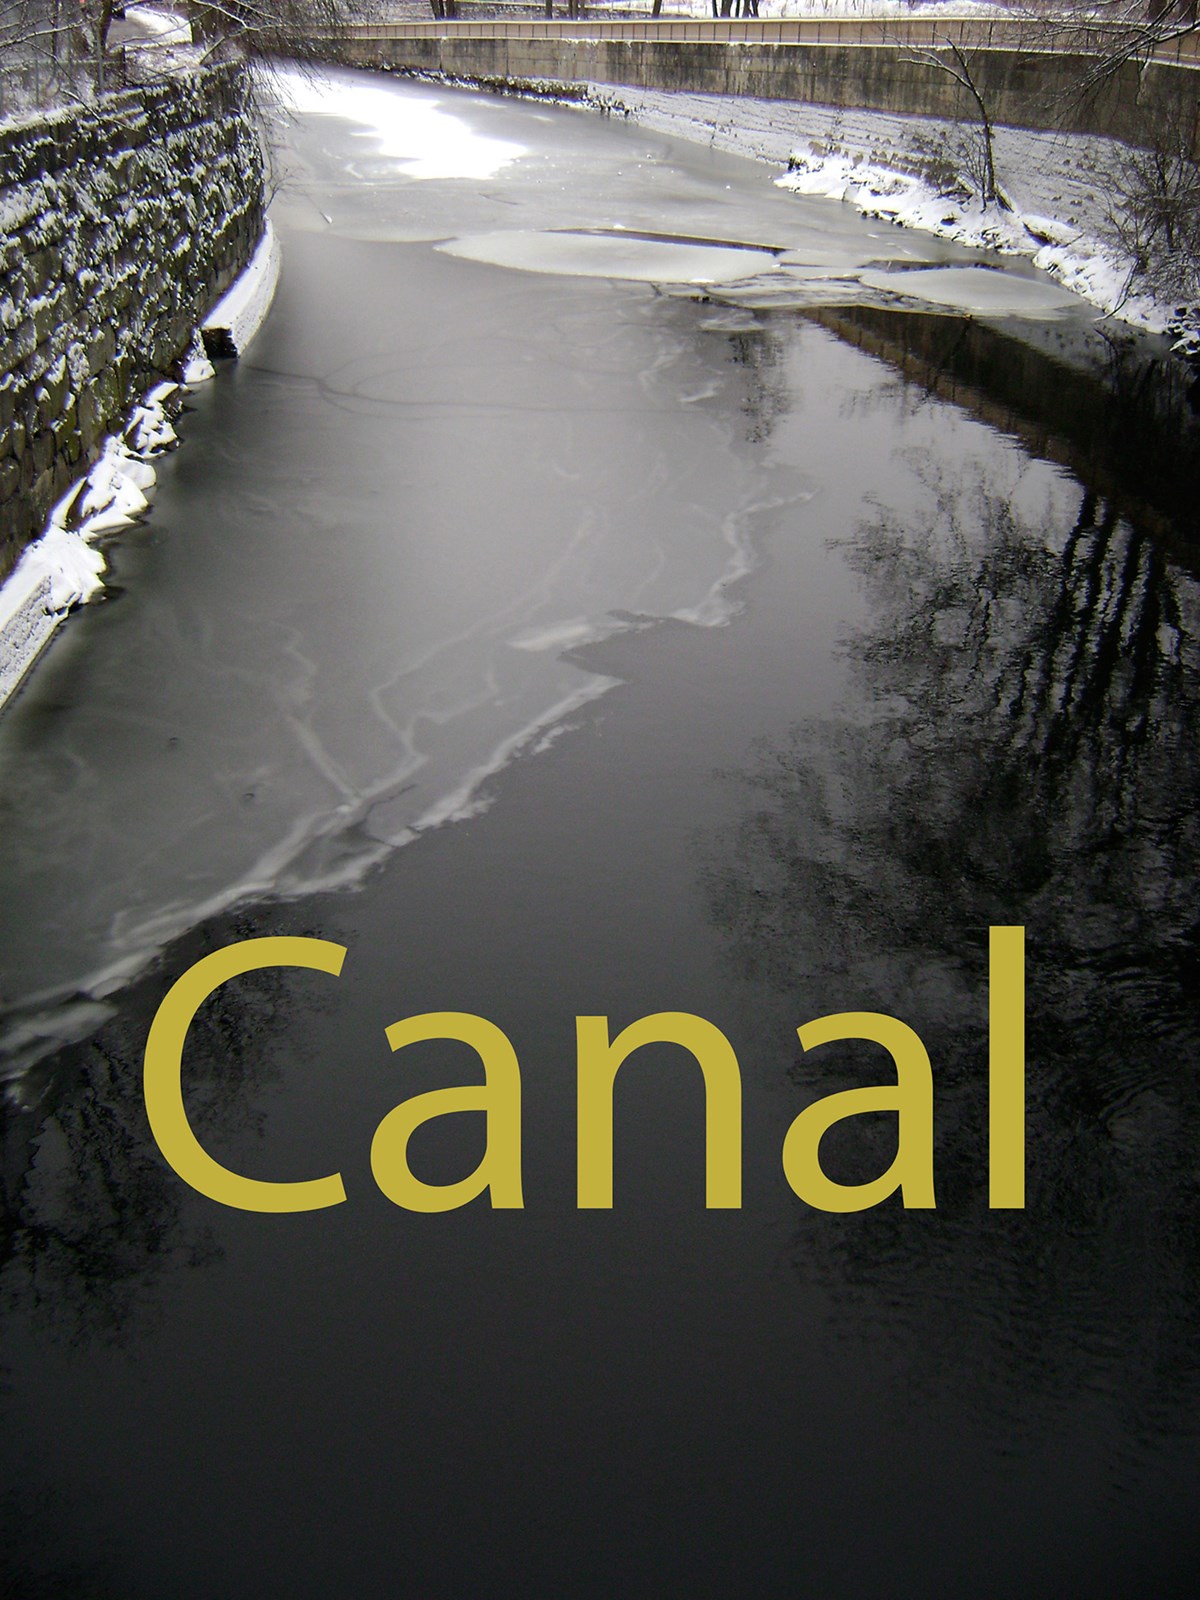 Picture of Lowell canals with word "Canal" overlaid.